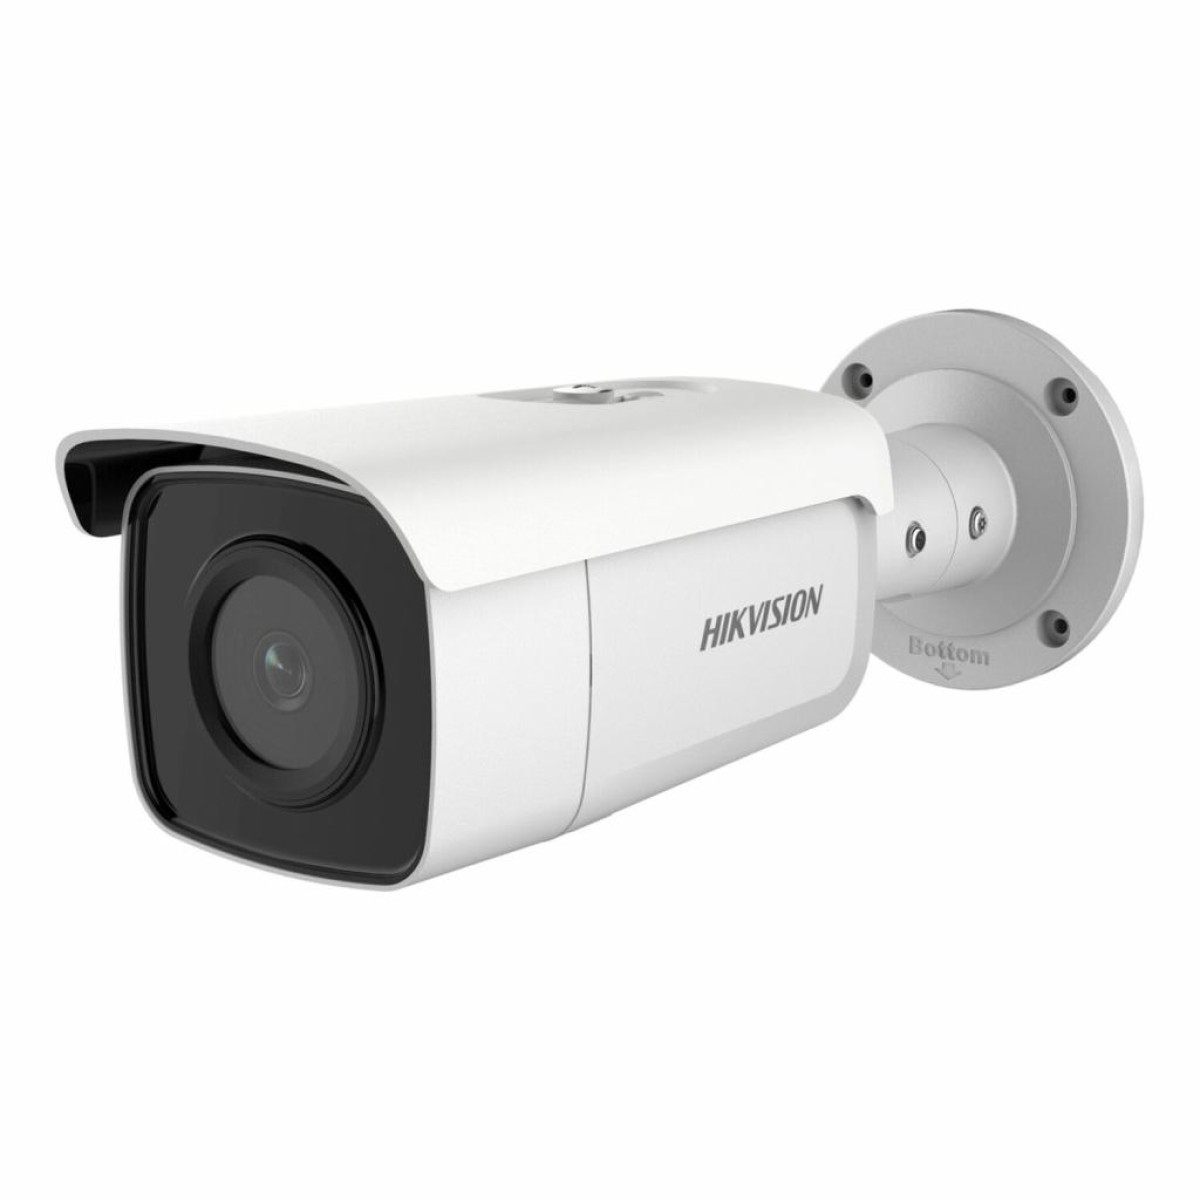 IP-камера Hikvision DS-2CD2T85G1-I8 (4.0) 98_98.jpg - фото 1